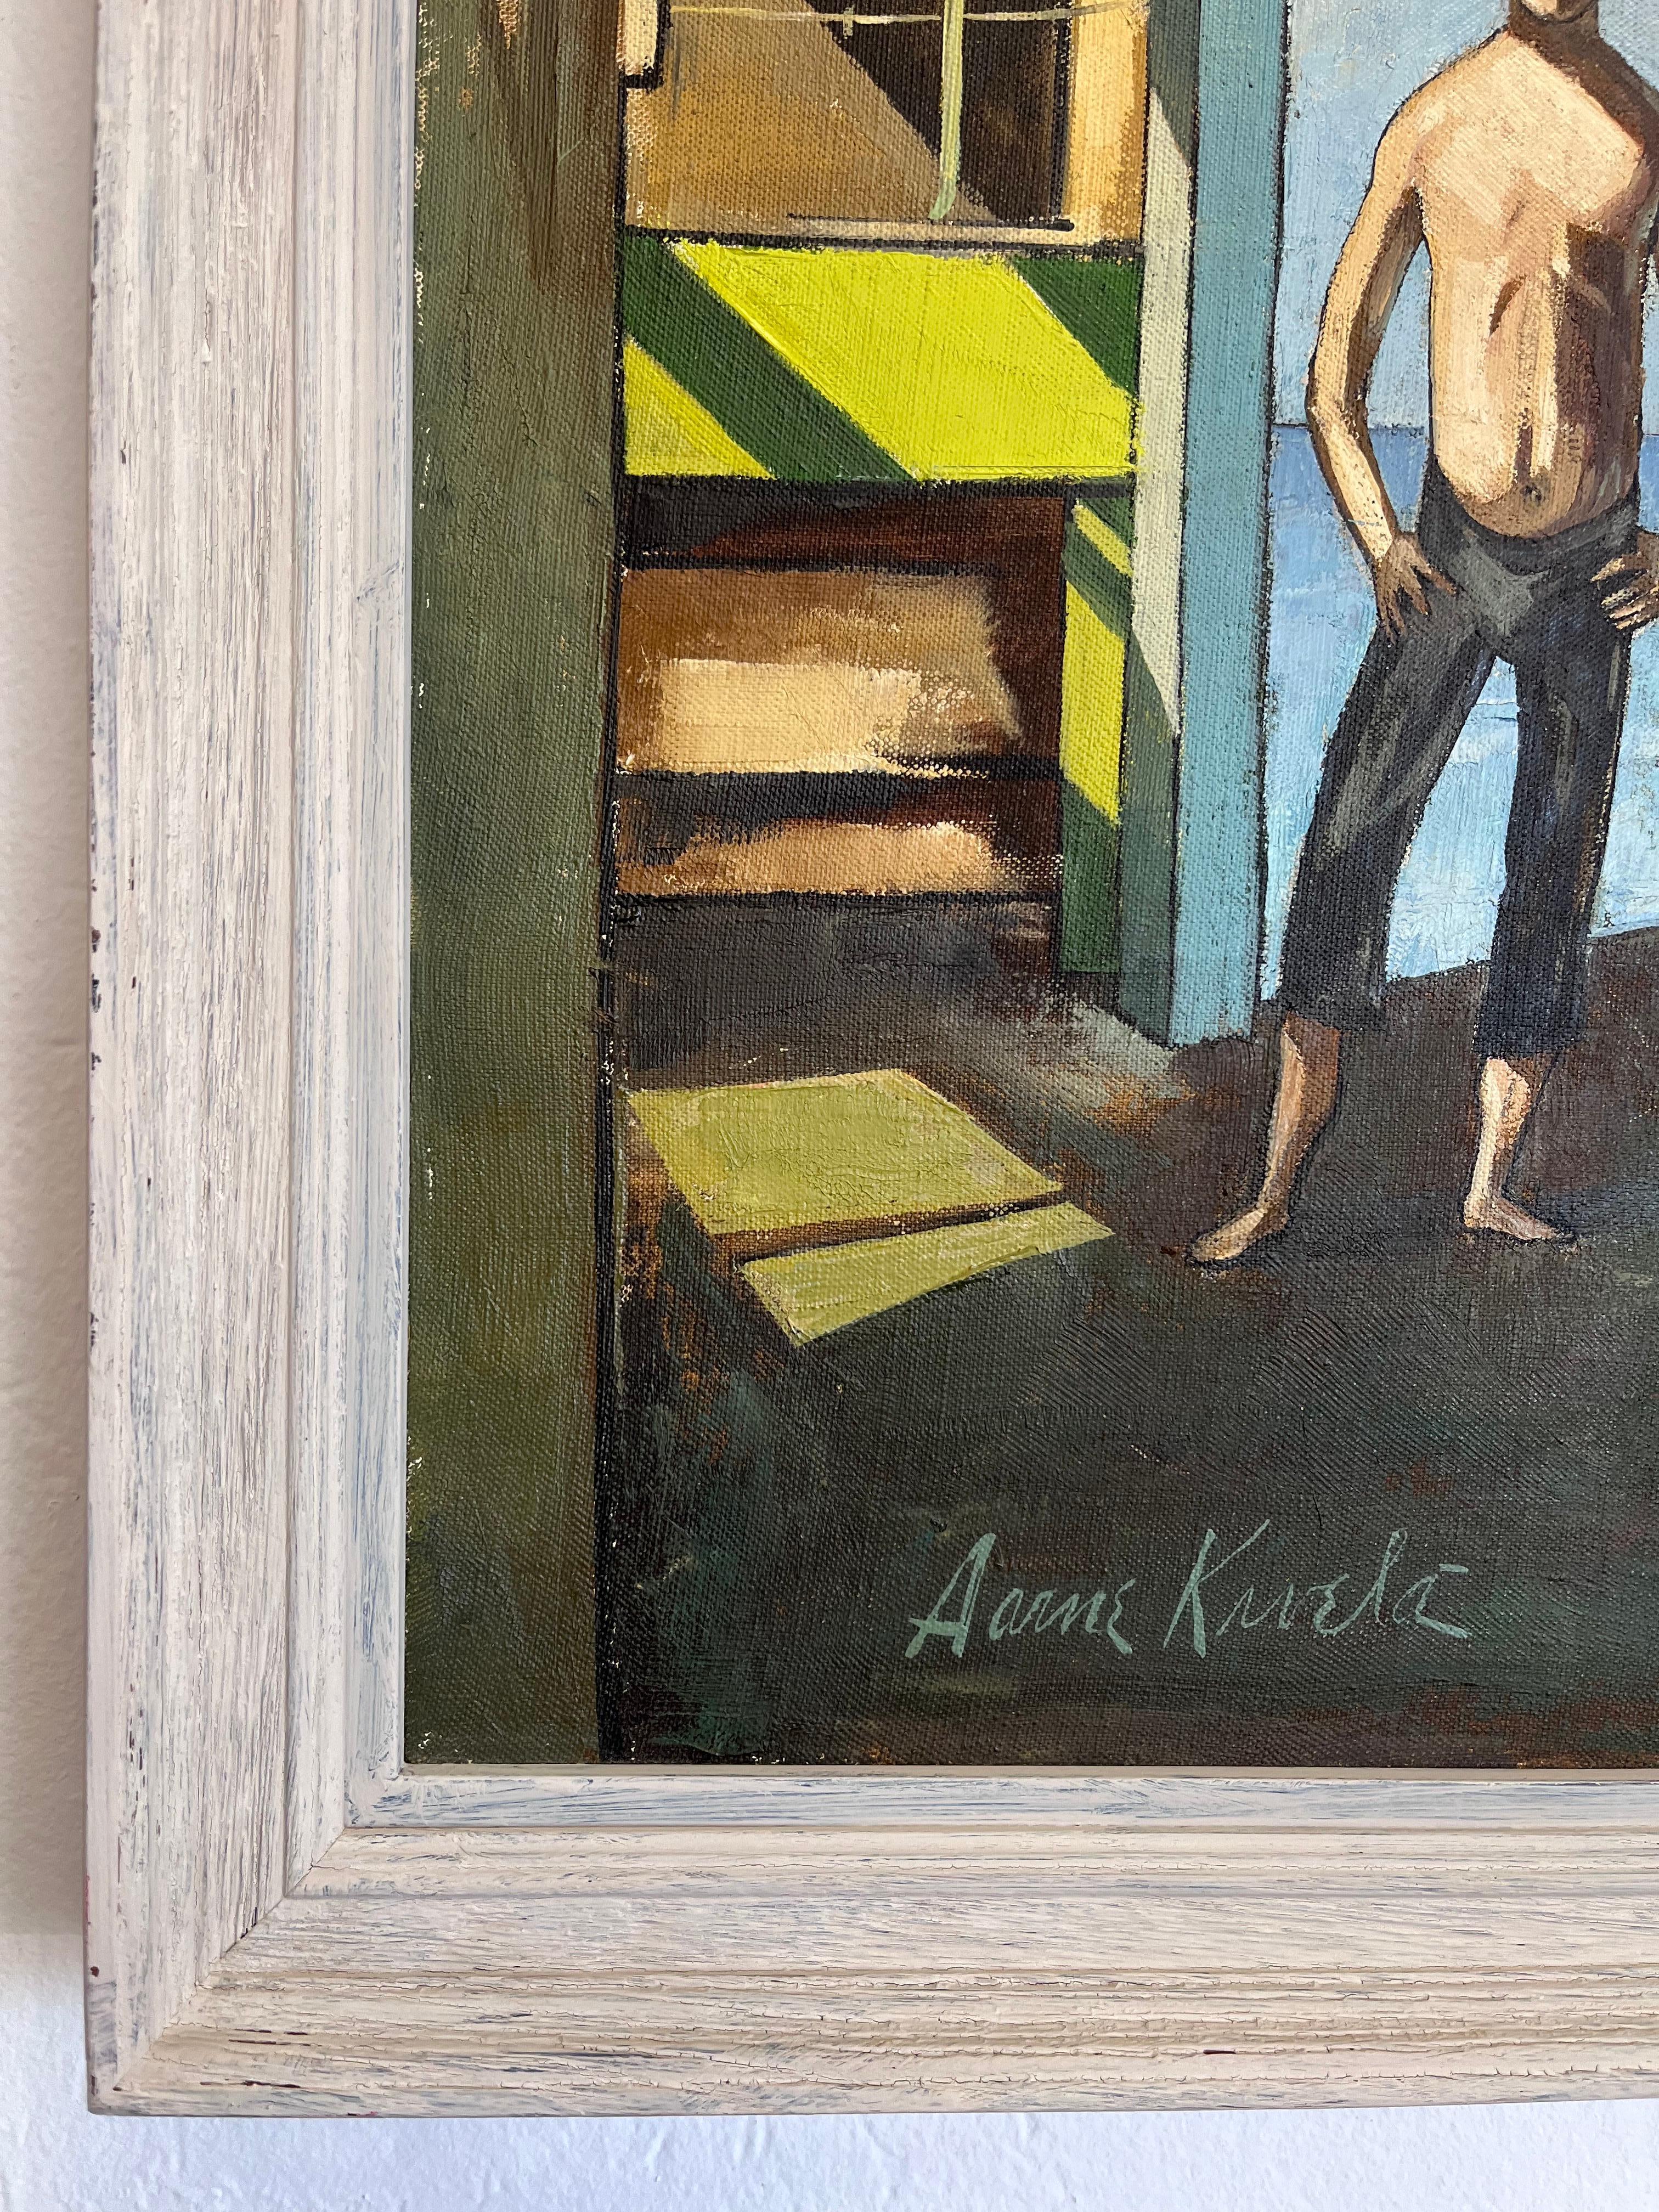 20th Century Mid Century Precisionist Style American Painting of a Male Figure in an Interior